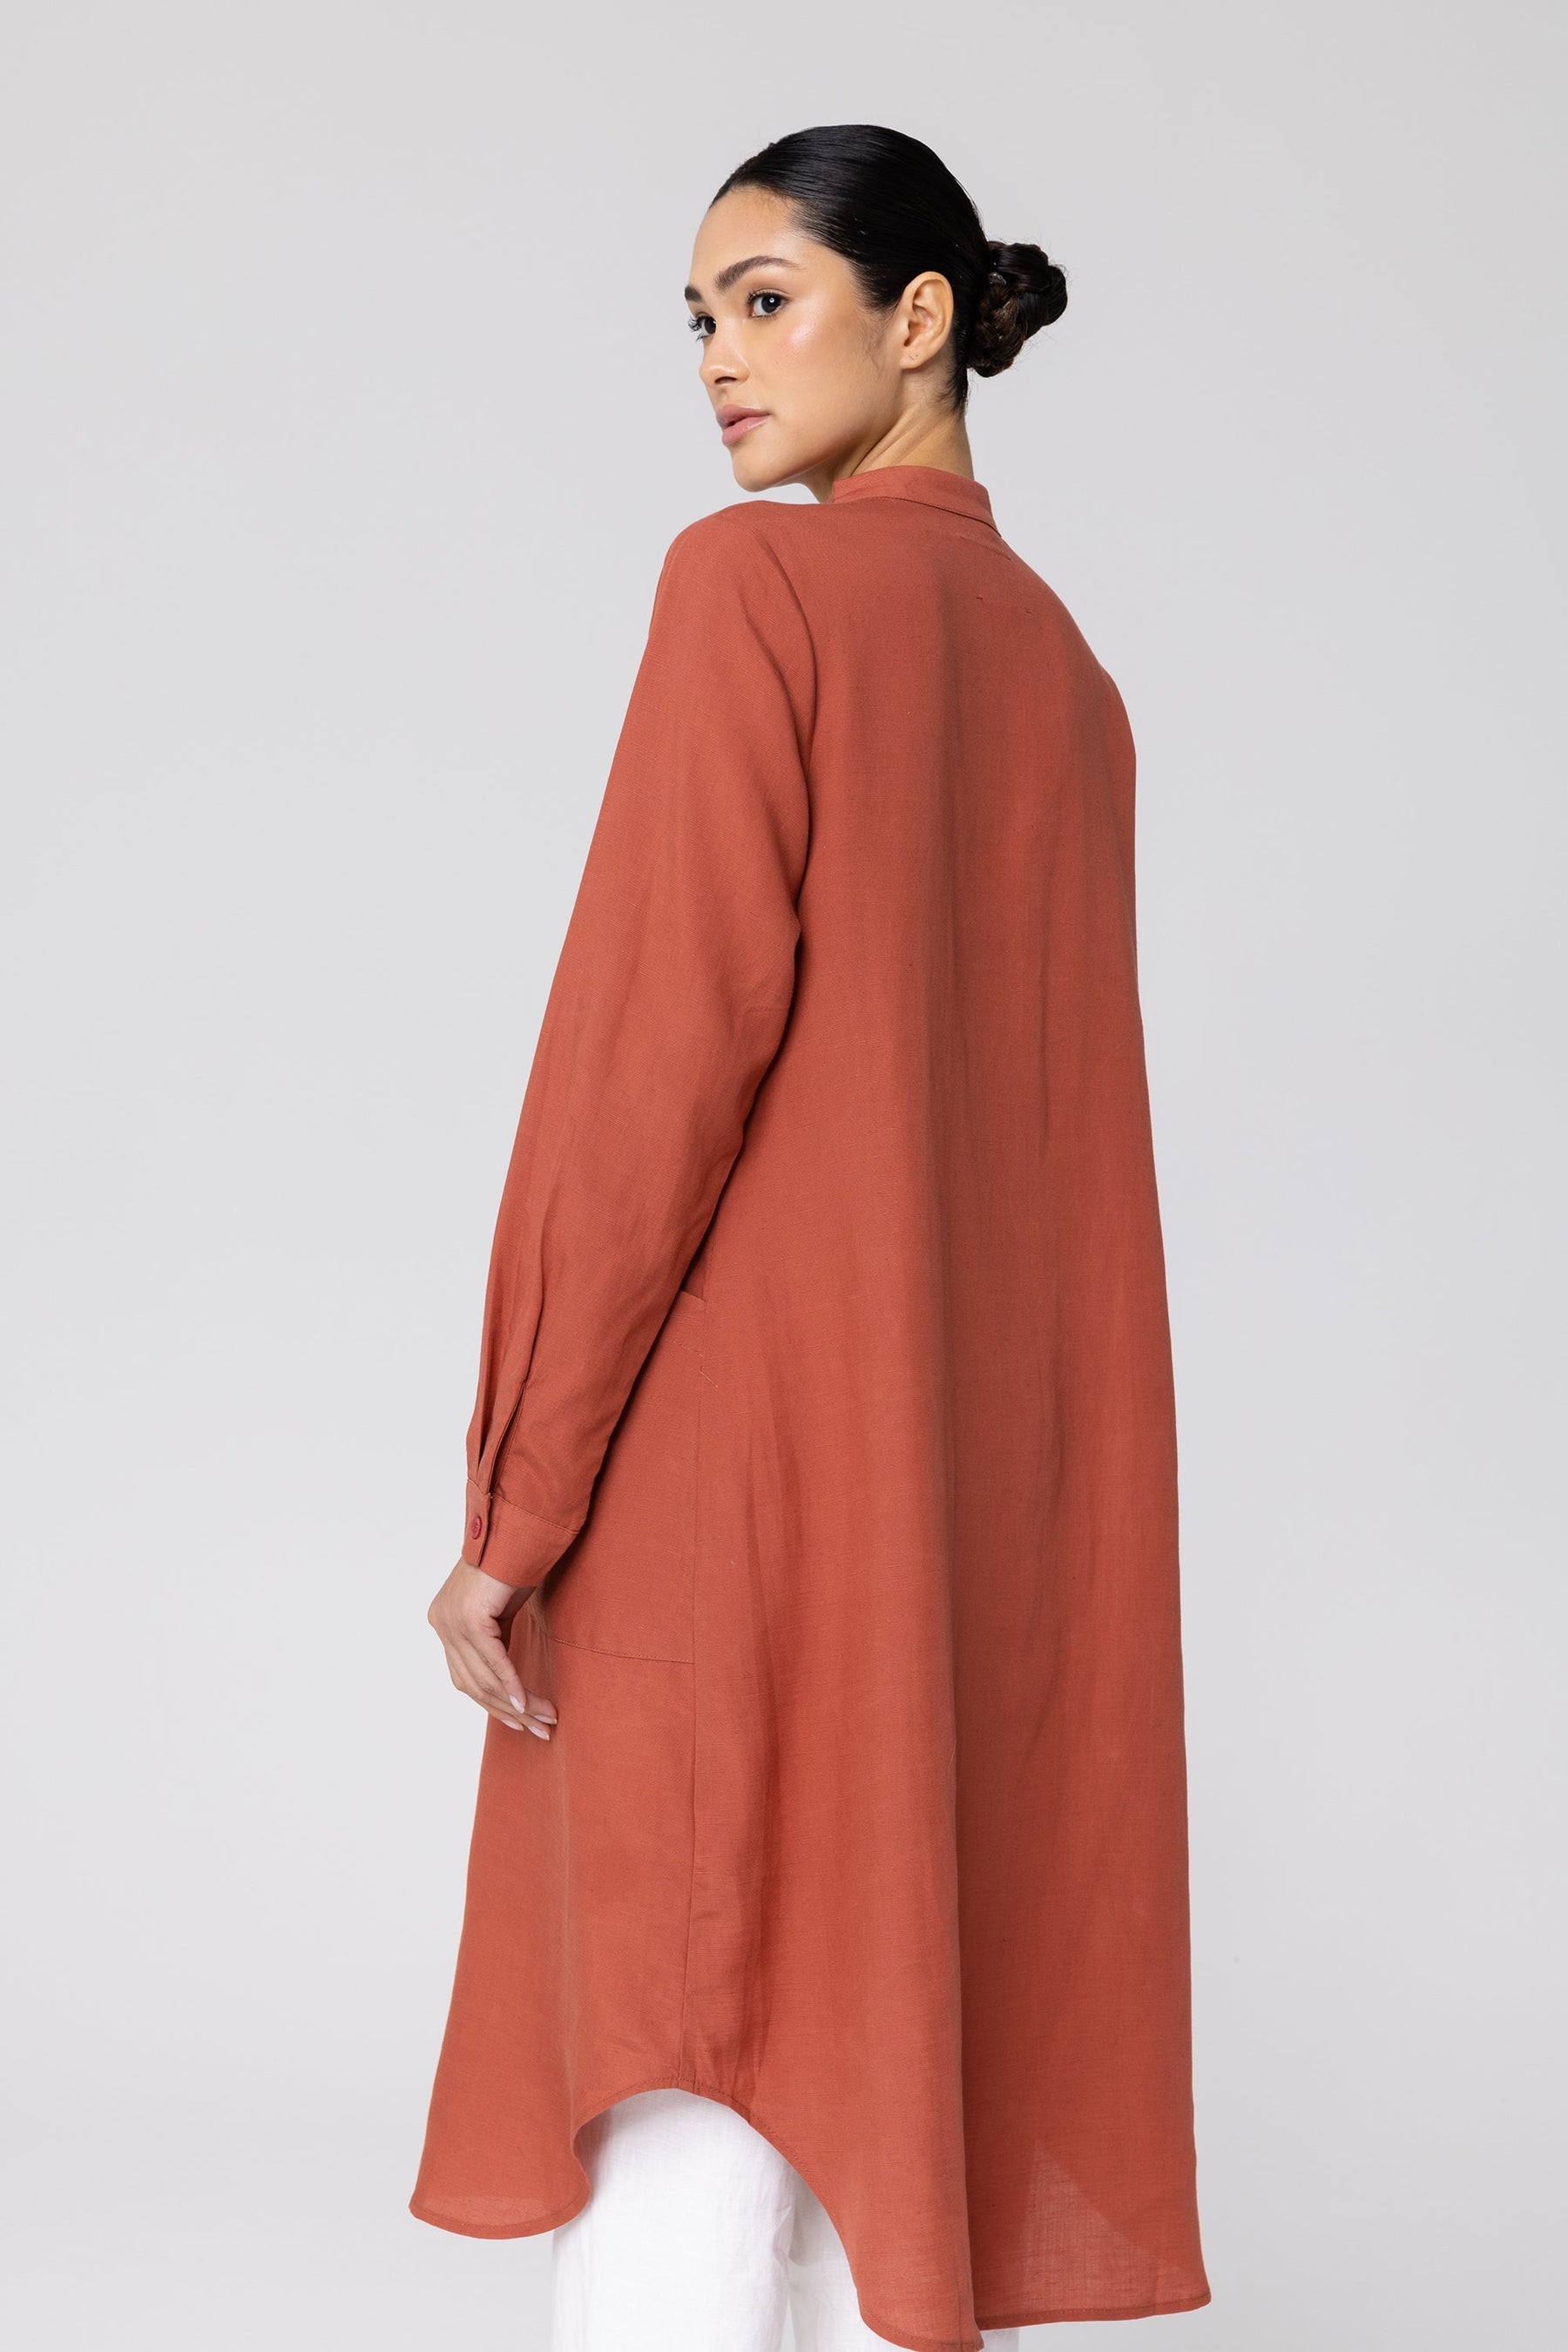 Nadine Button Down Utility Tunic - Baked Clay Veiled Collection 